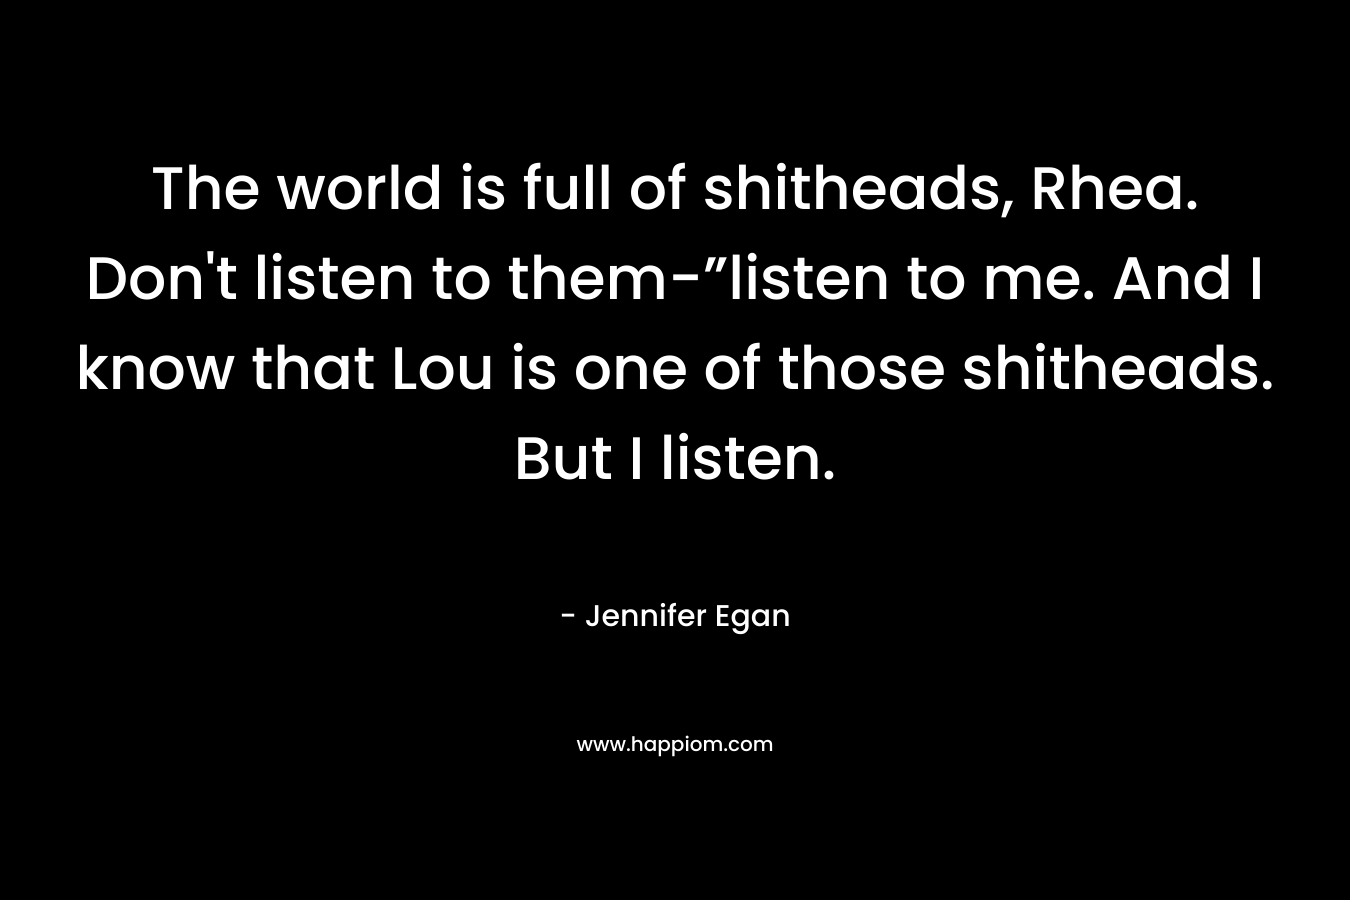 The world is full of shitheads, Rhea. Don’t listen to them-”listen to me. And I know that Lou is one of those shitheads. But I listen. – Jennifer Egan